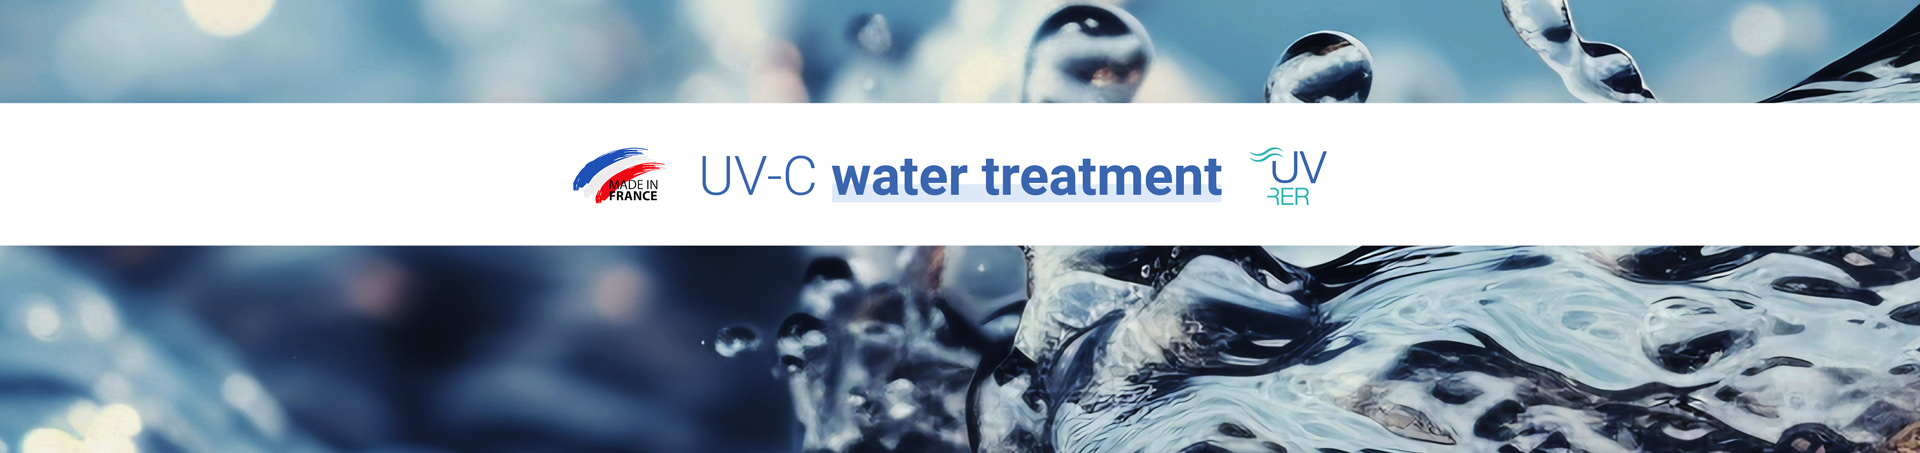 ultraviolet water treatment